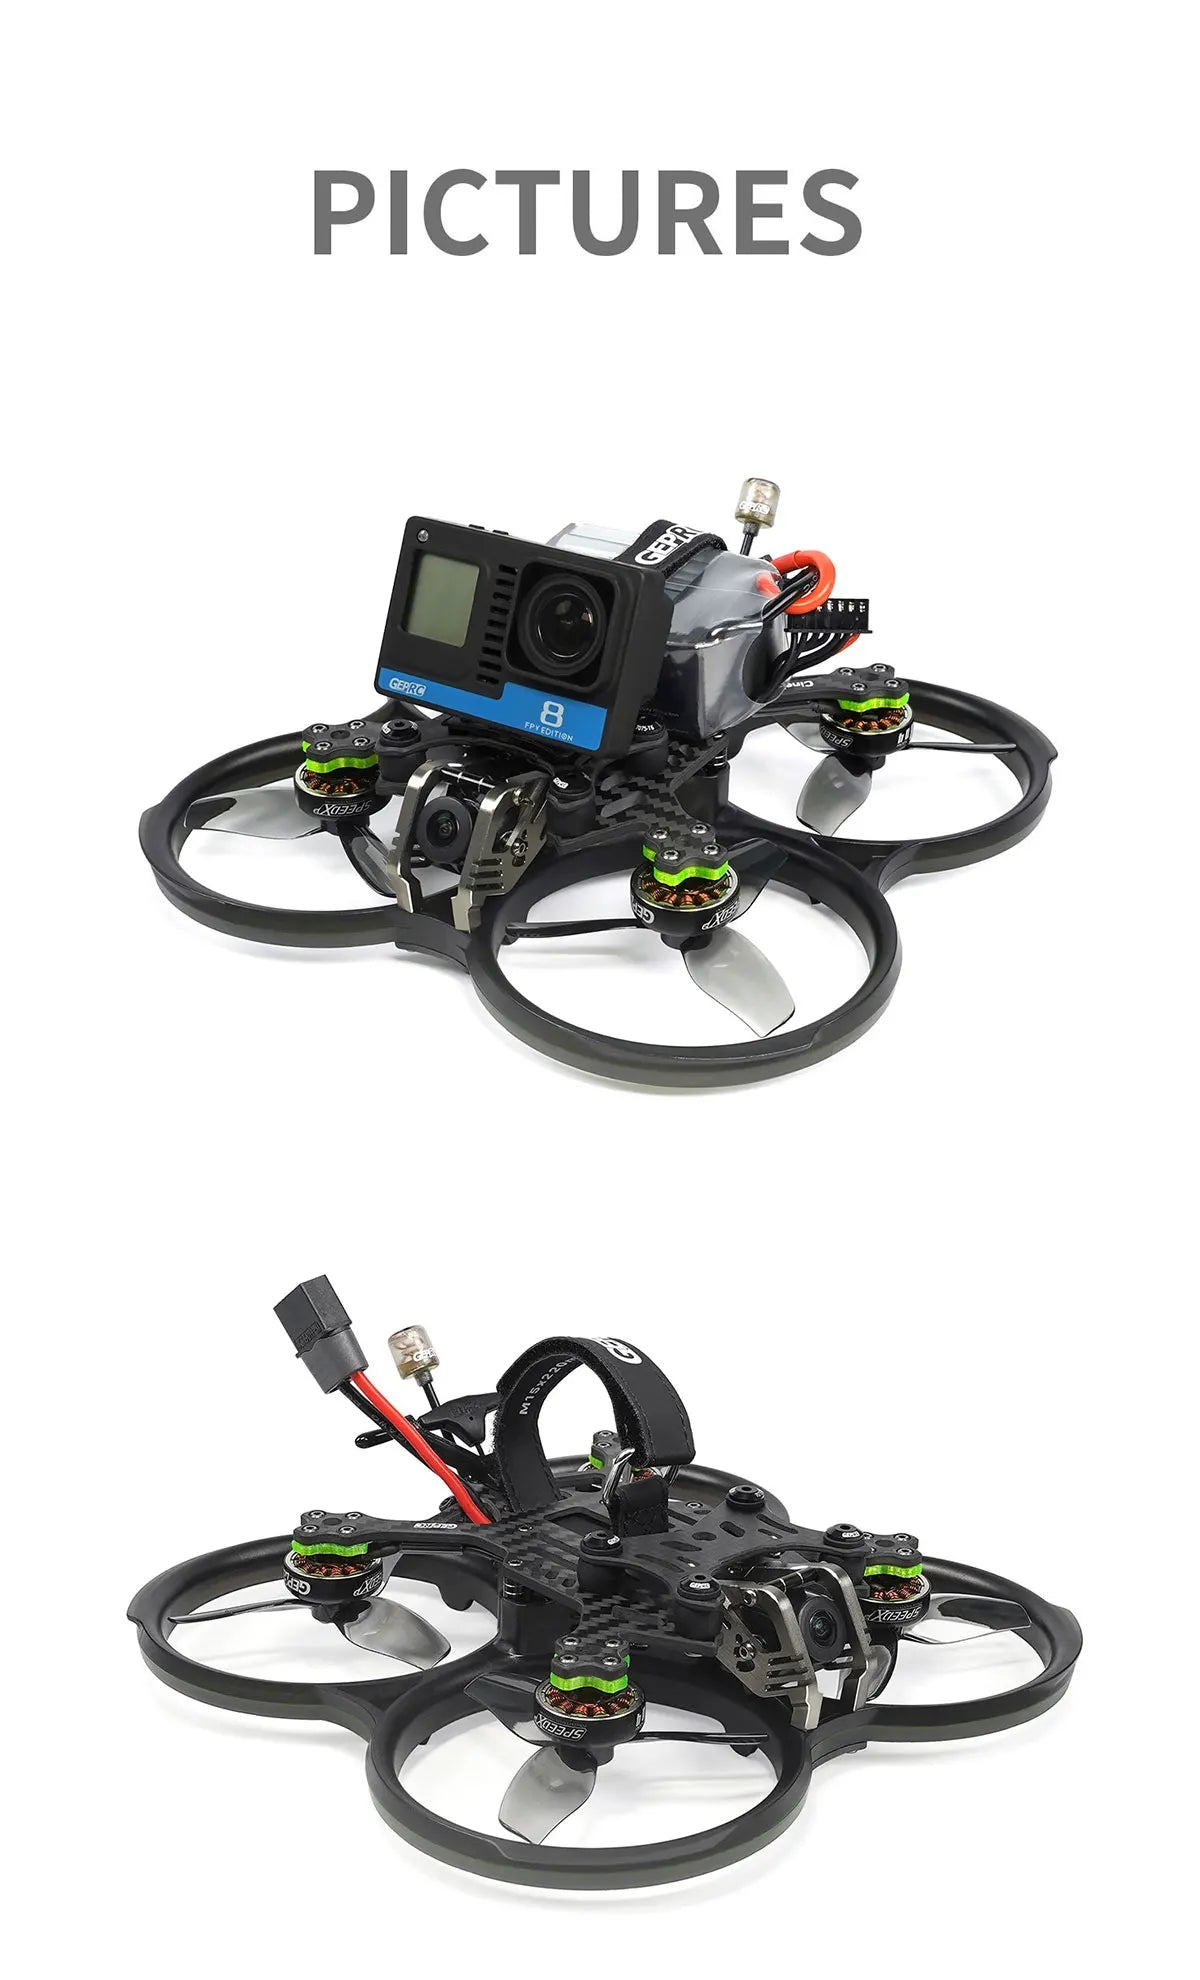 GEPRC Cinebot 30 FPV Drone, PICTURES 8 Xu33 GEHRO Edit